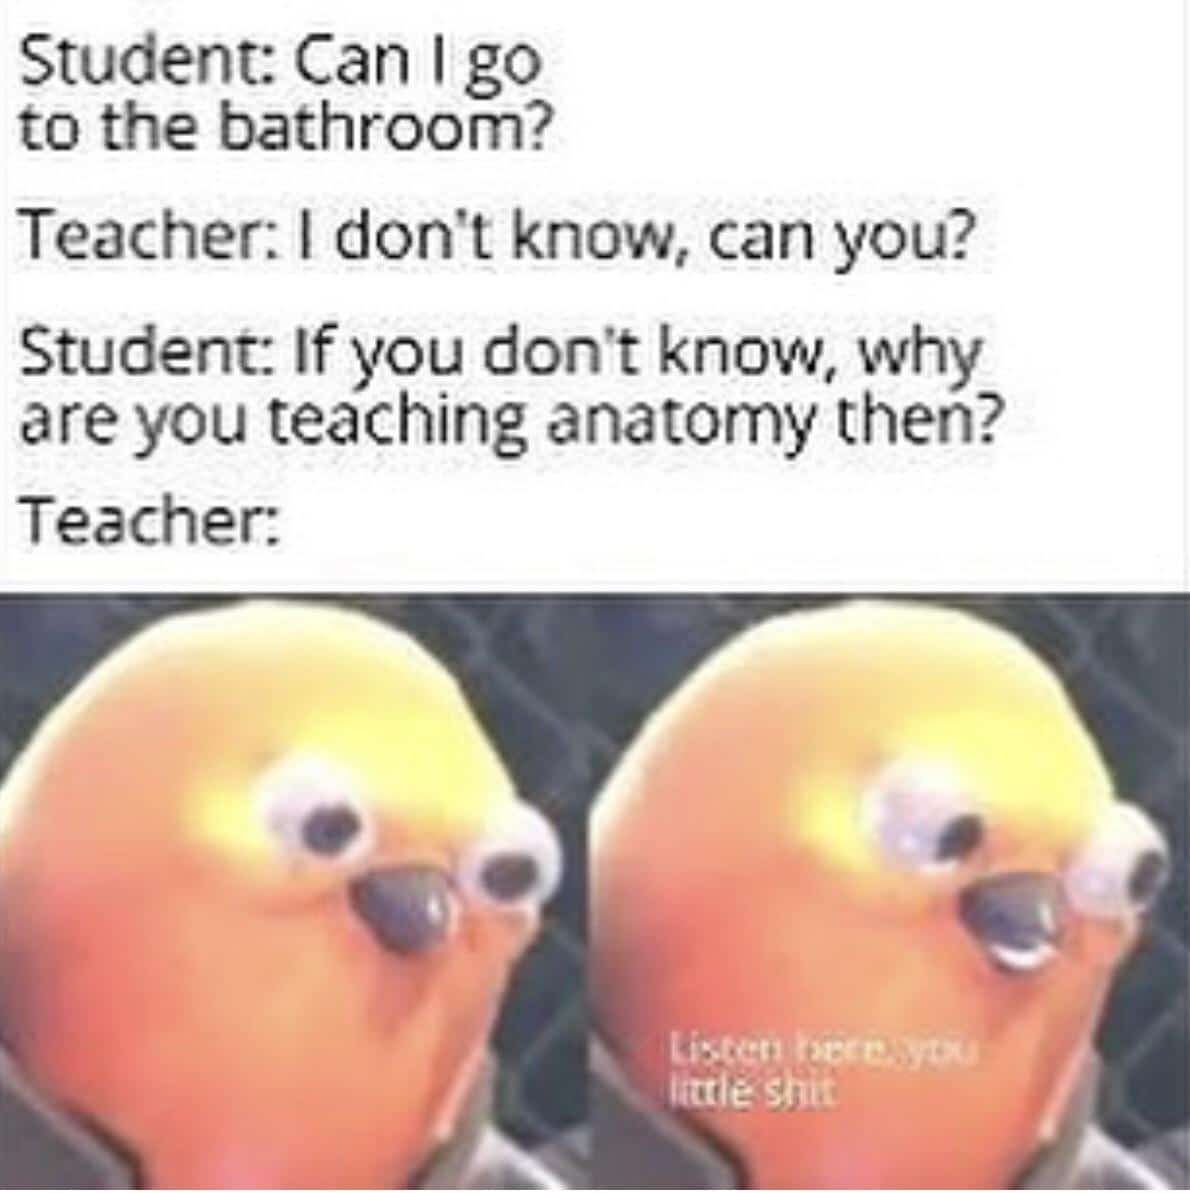 Dank Meme dank-memes cute text: Student: Can I go to the bathroom? Teacher: I don't know, can you? Student: If you don't know, why are you teaching anatomy then? Tea cher: shit 